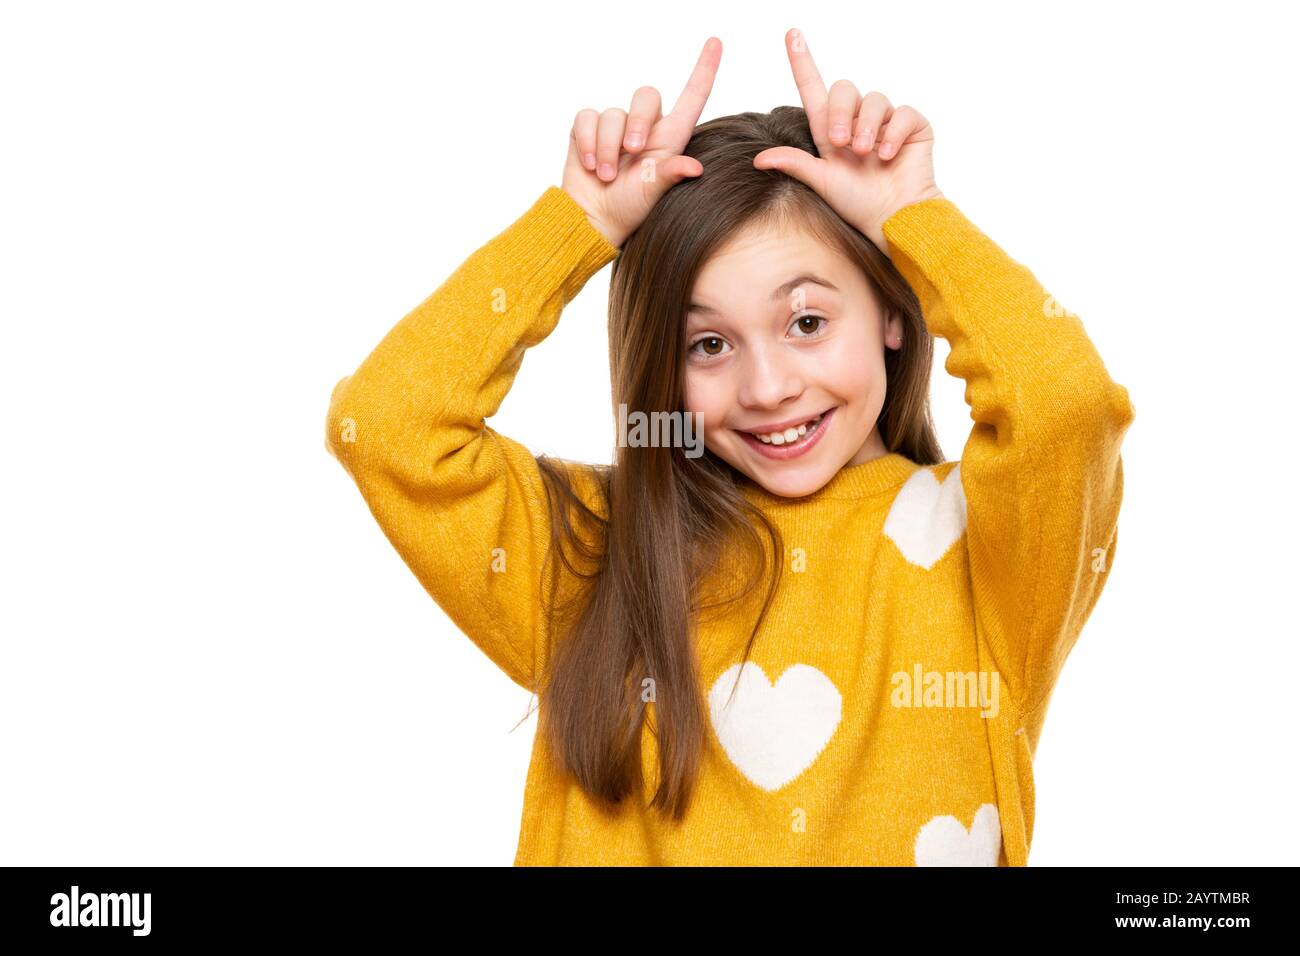 Studio shot of expressive cute child holding fingers behind head like bunny ears or horns, looking at camera and smiling. Lifestyle and beautiful peop Stock Photo